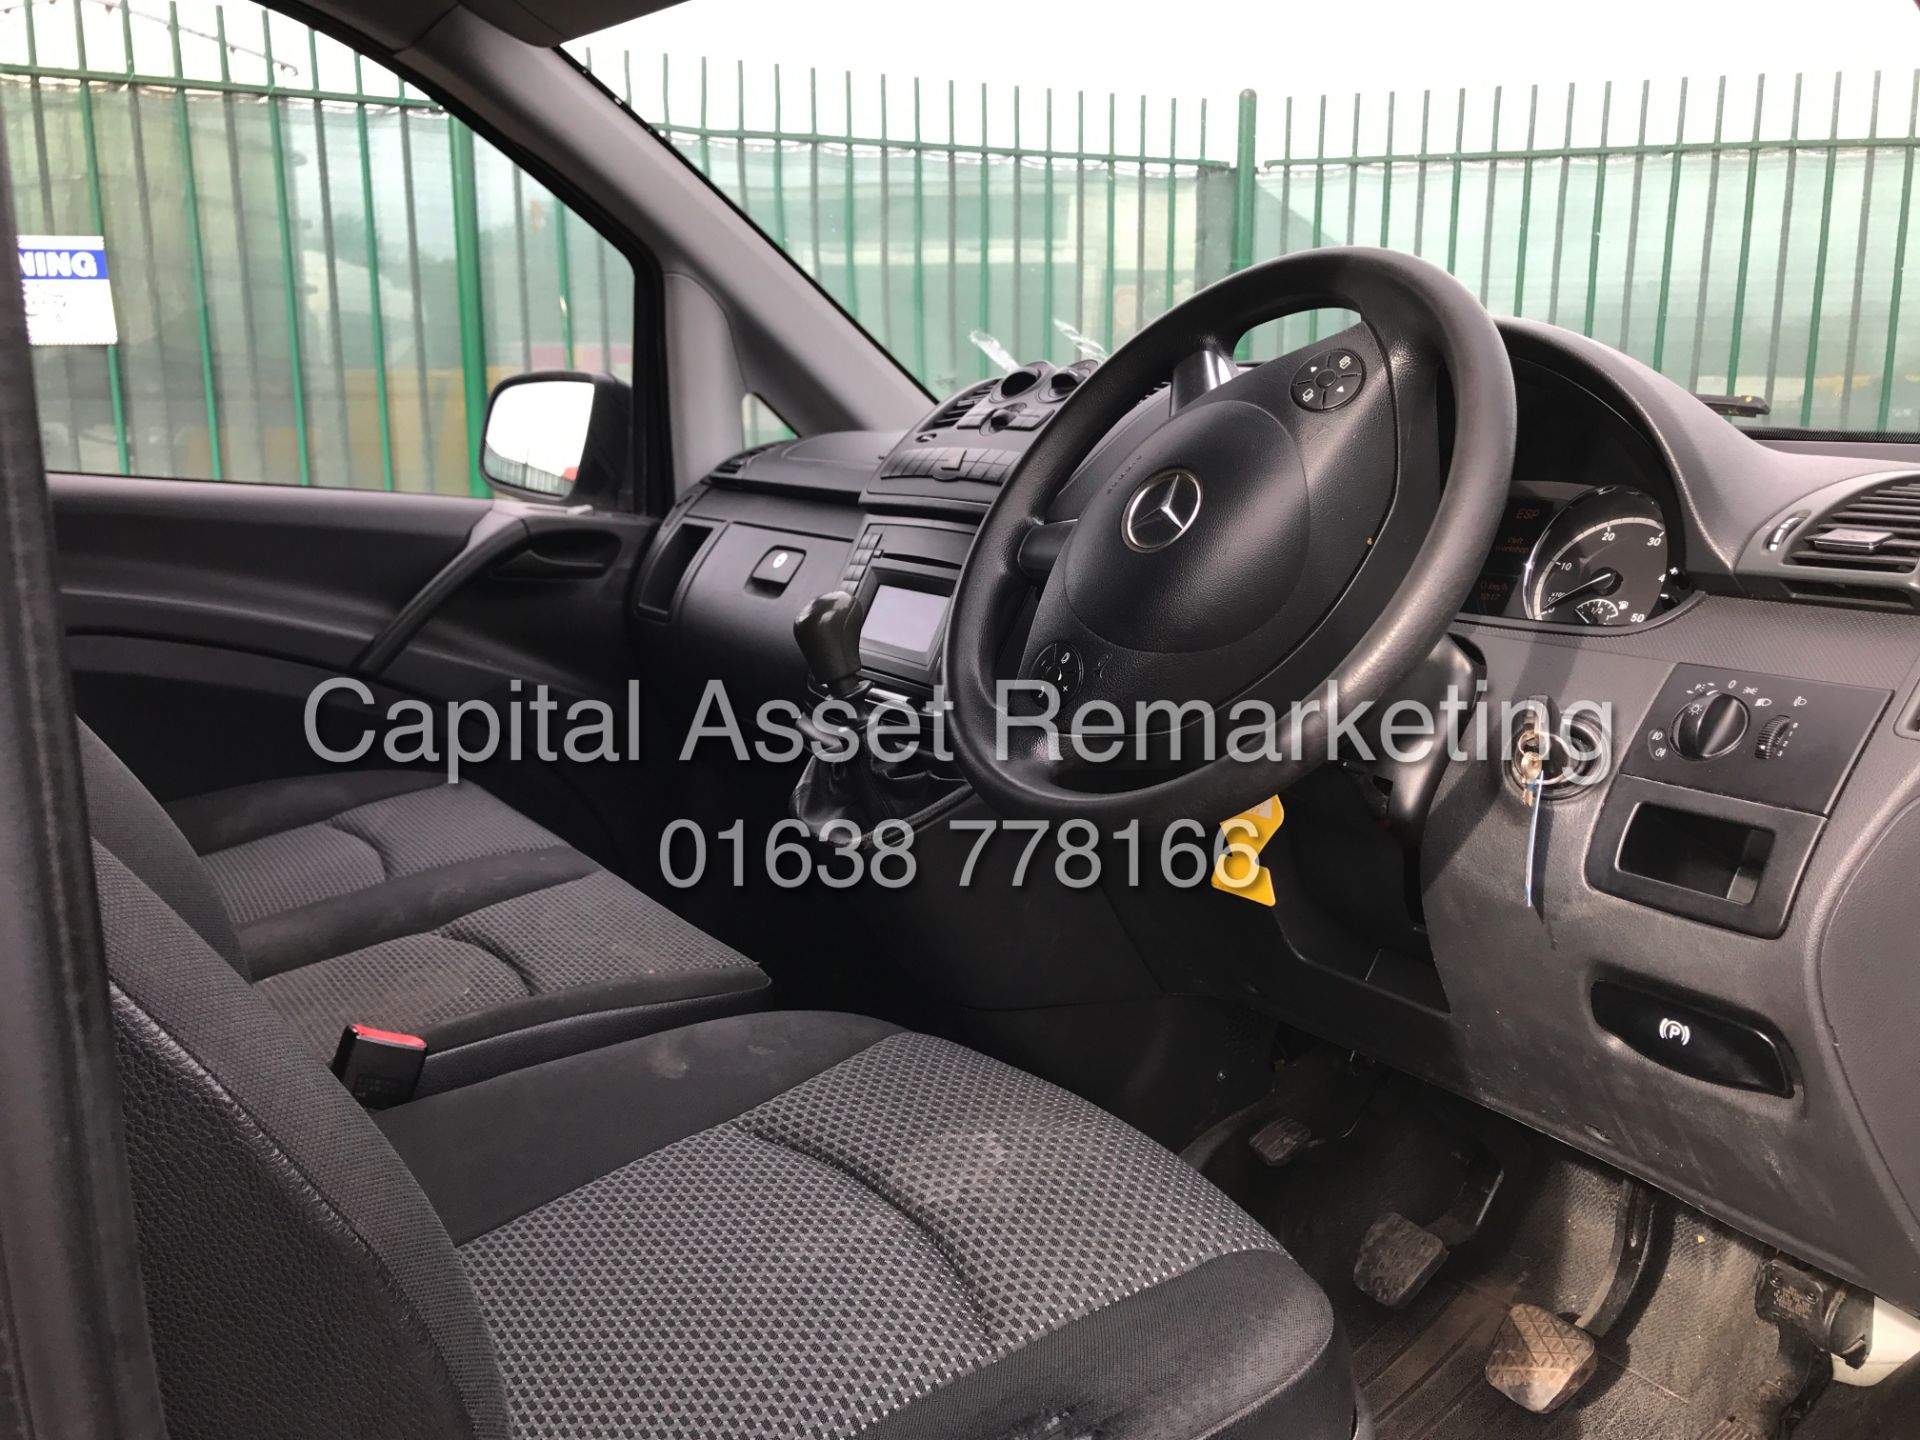 MERCEDES VITO 113CDI "136BHP - 6 SPEED" 13 REG NEW SHAPE - AIR CON - ELEC PACK - CRUISE - 1 OWNER - Image 7 of 13